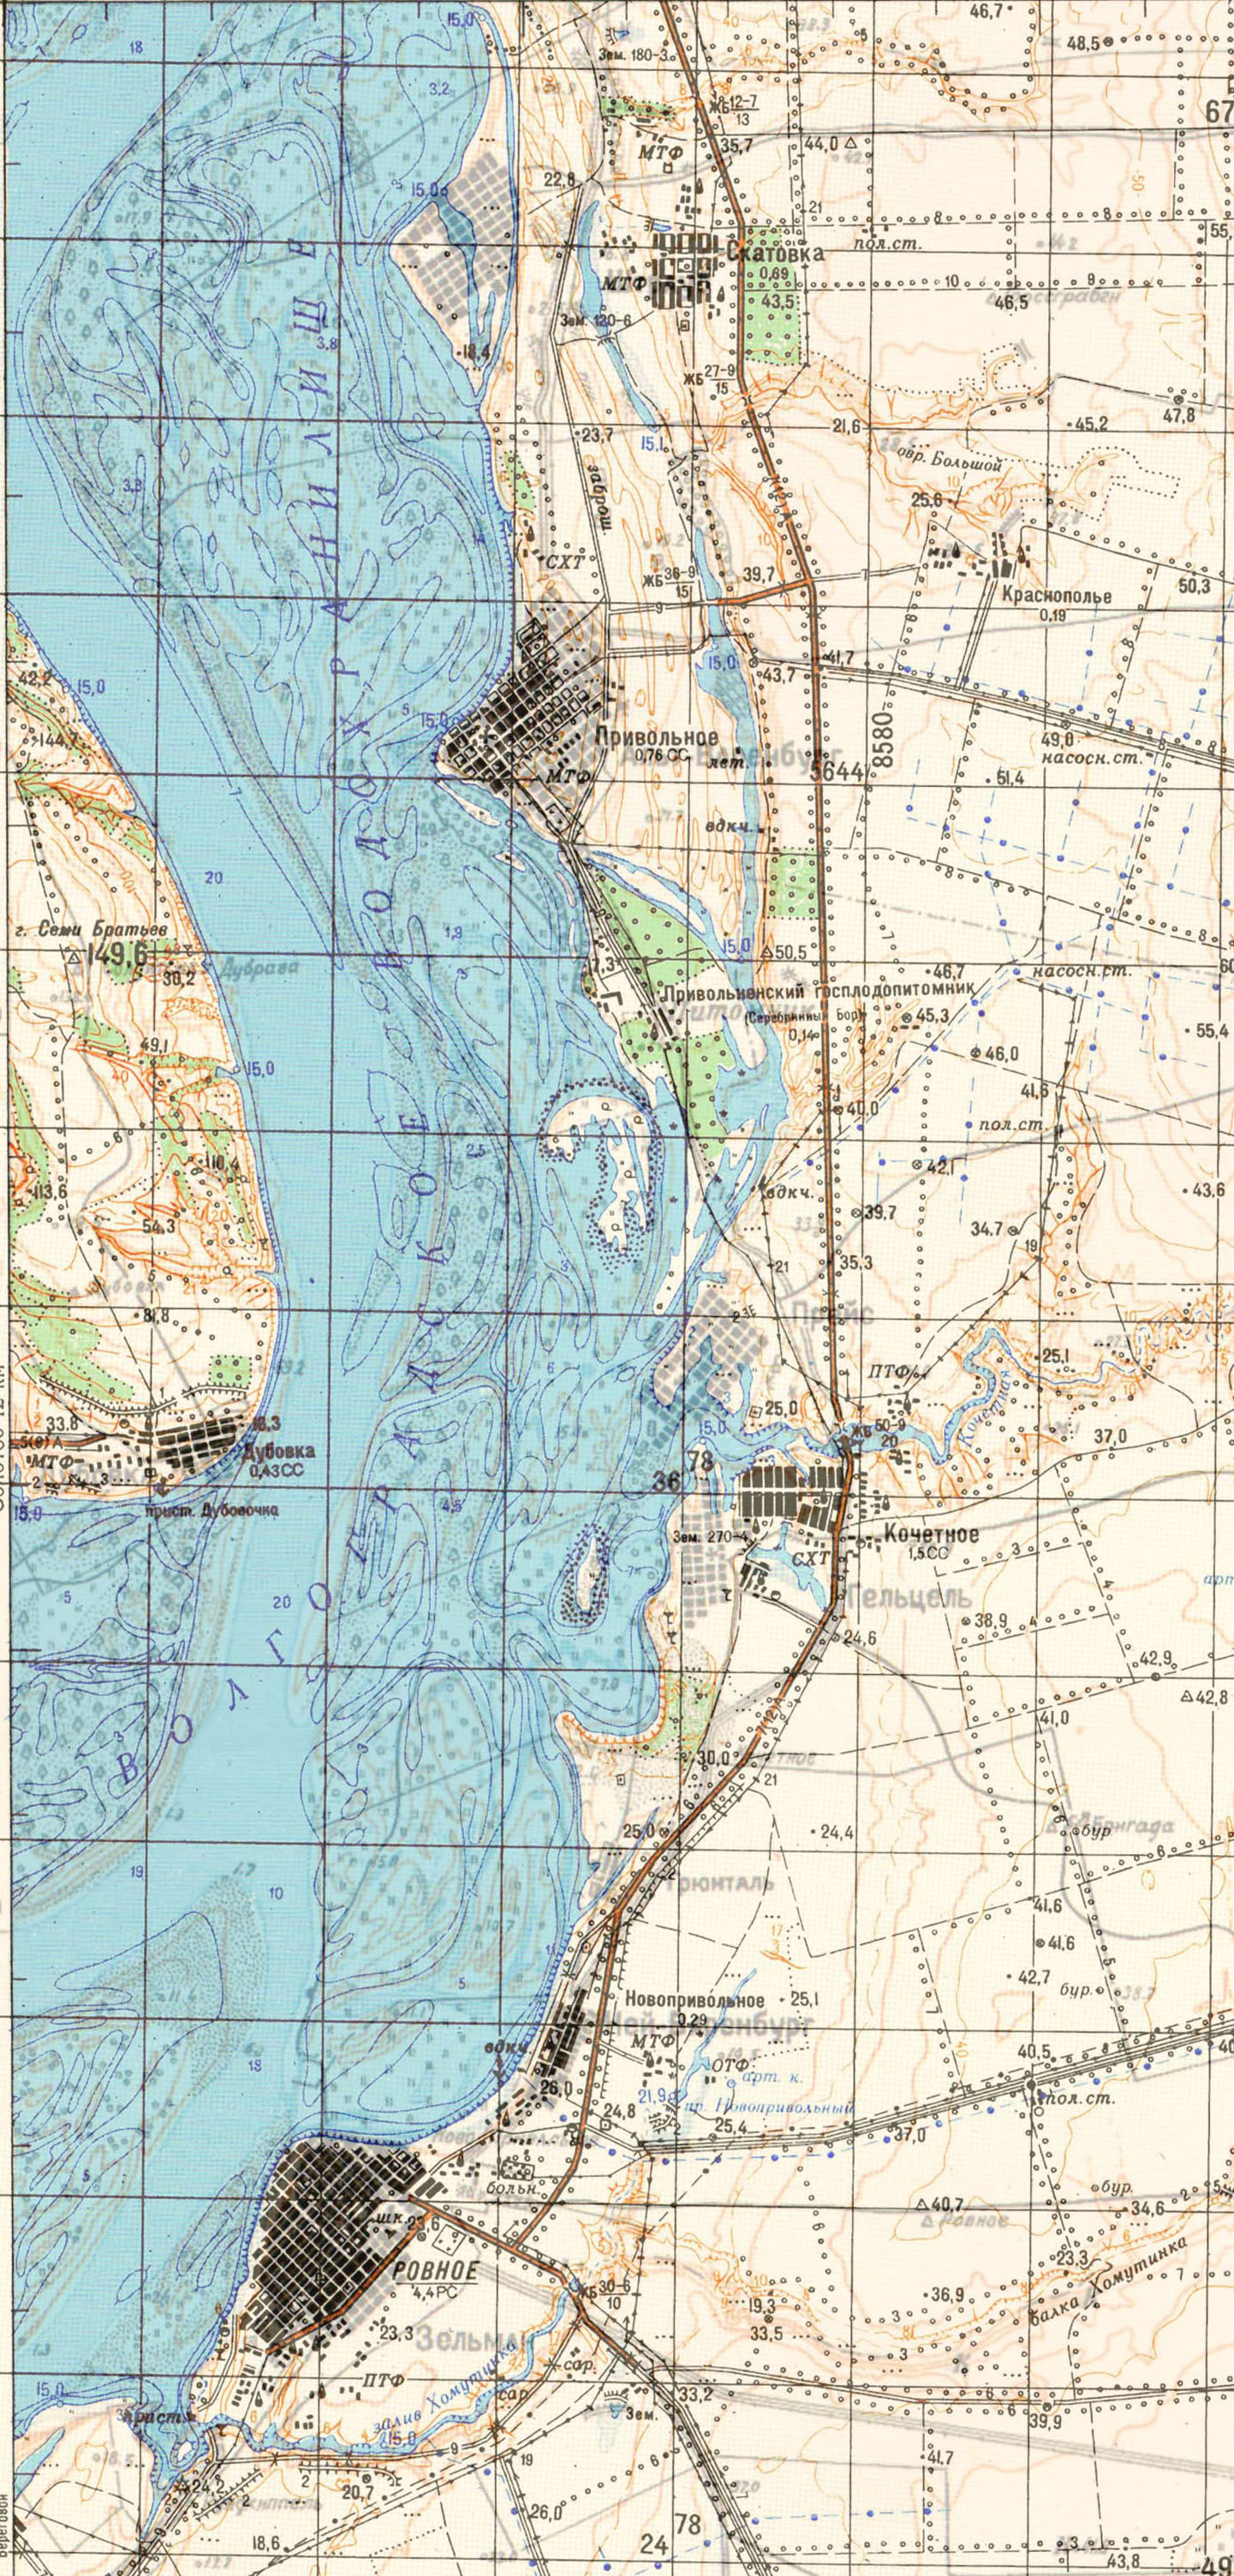 This map overlays several maps that show the location of Hölzel (just below center) before and after the inundation of the Volga Reservoir in 1961. Source: Vladimir Kakorin.